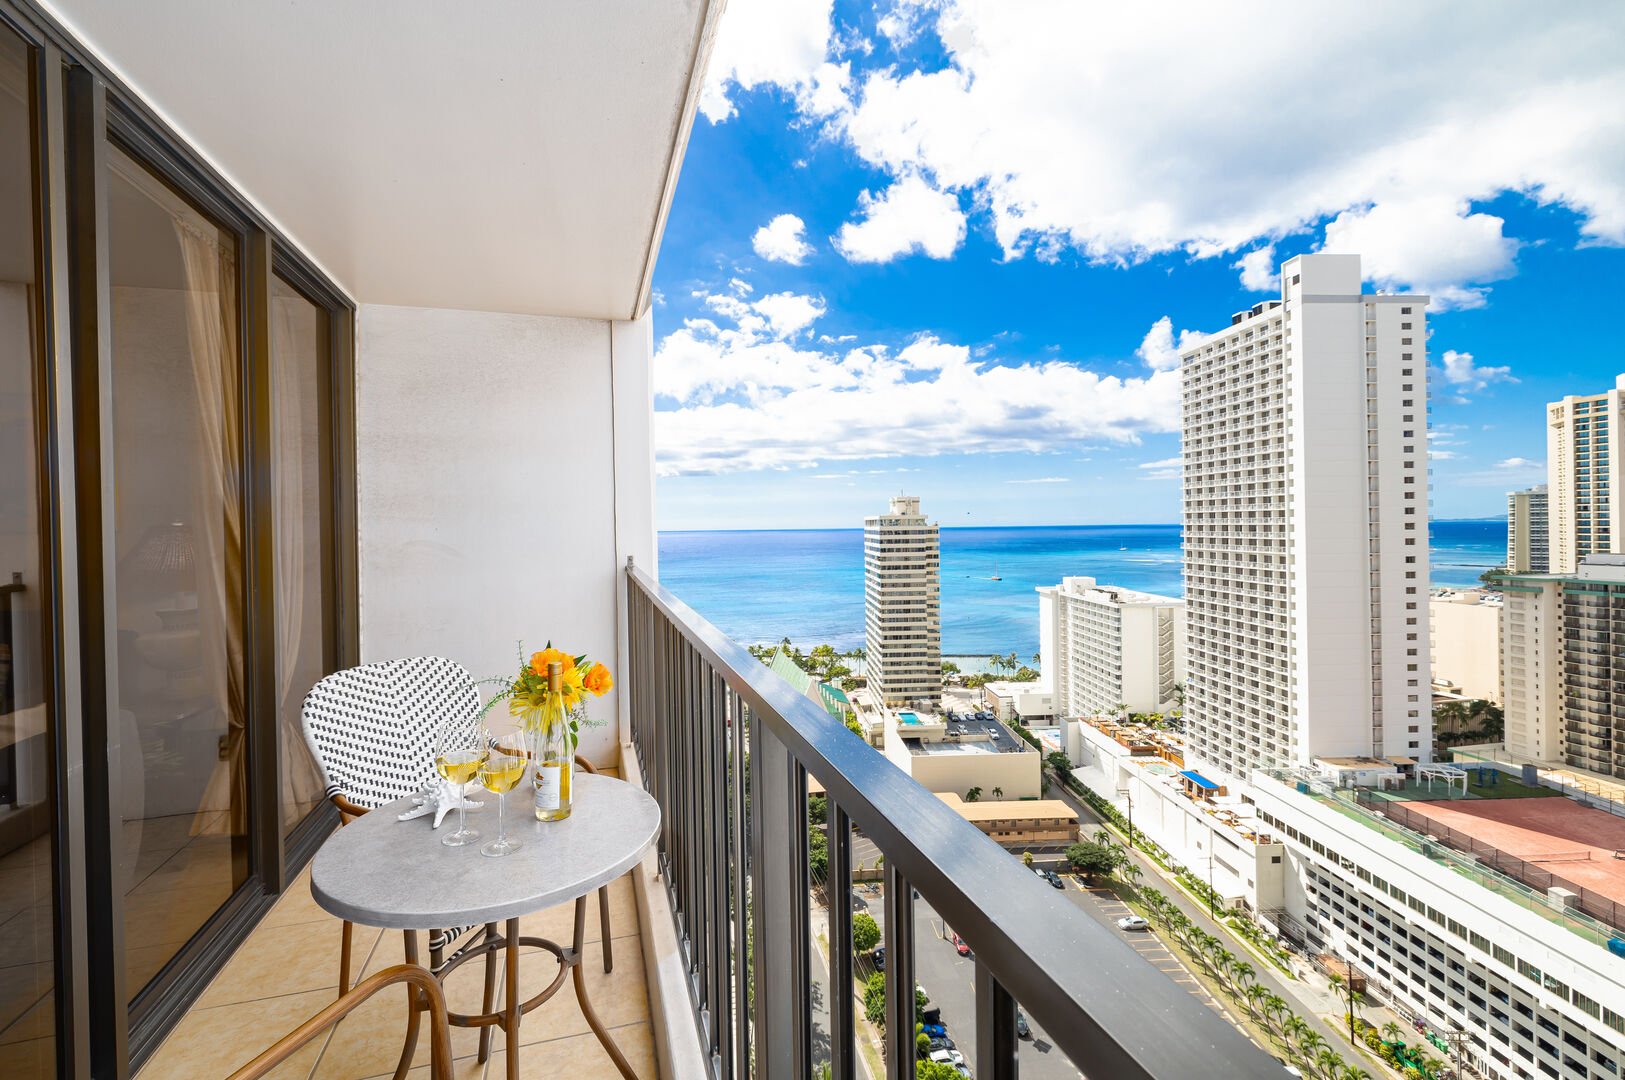 Enjoy the partial ocean view from the balcony and catch a glimpse of  beautiful sunsets